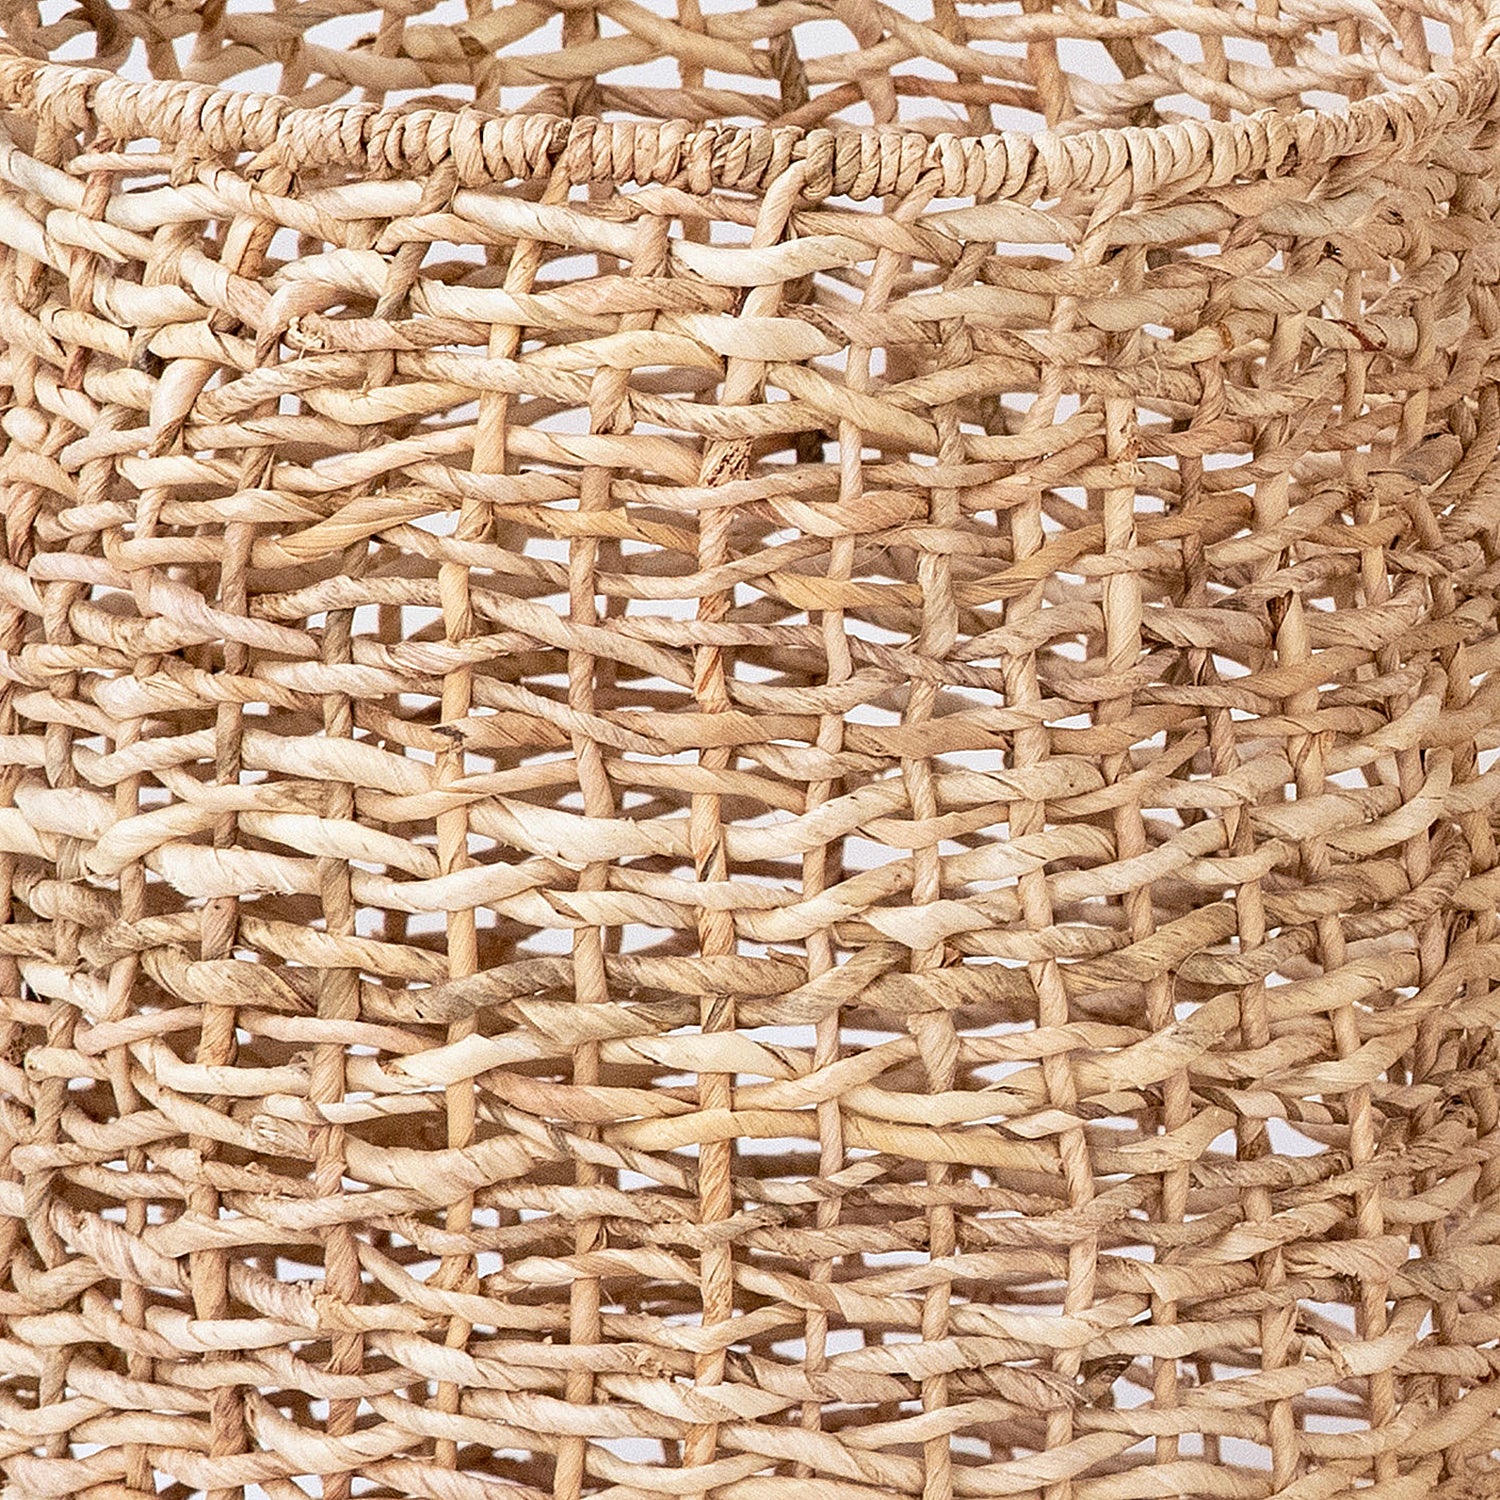 Create a warm and relaxed look in your home with this set of decorative baskets. These baskets are crafted from natural, hand-braided Abaca fibers, a durable material known for its exceptional strength and flexibility. With their organic and subtle expression, these baskets will make a stunning addition to a laundry room or bathroom. Amethyst Home provides interior design, new home construction design consulting, vintage area rugs, and lighting in the Scottsdale metro area.